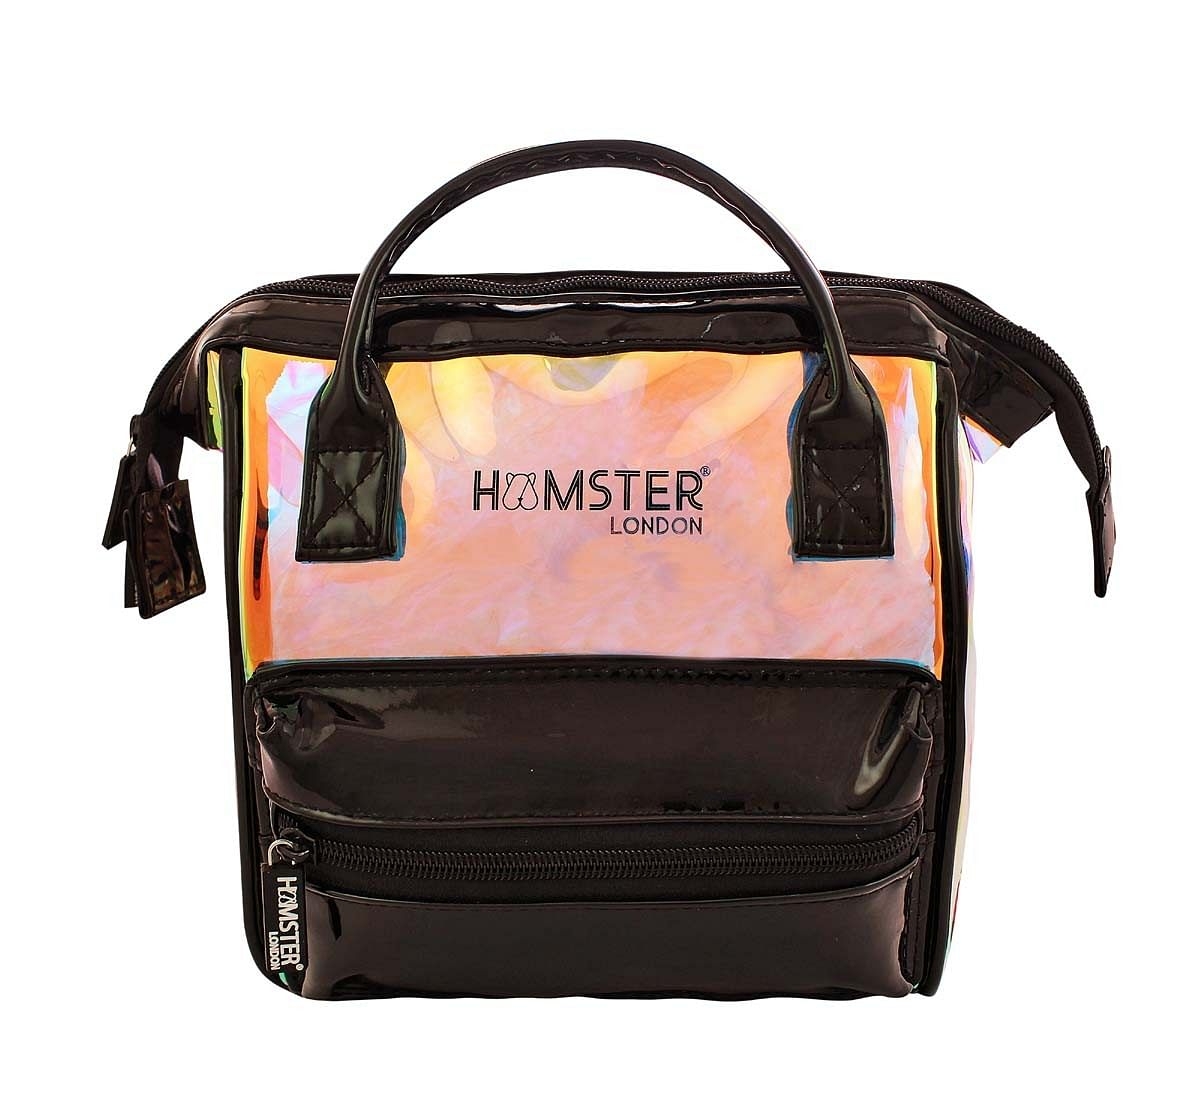 JENNIFER HAMLEY – Kickass Work bags for Professional Women. This is our  blog.